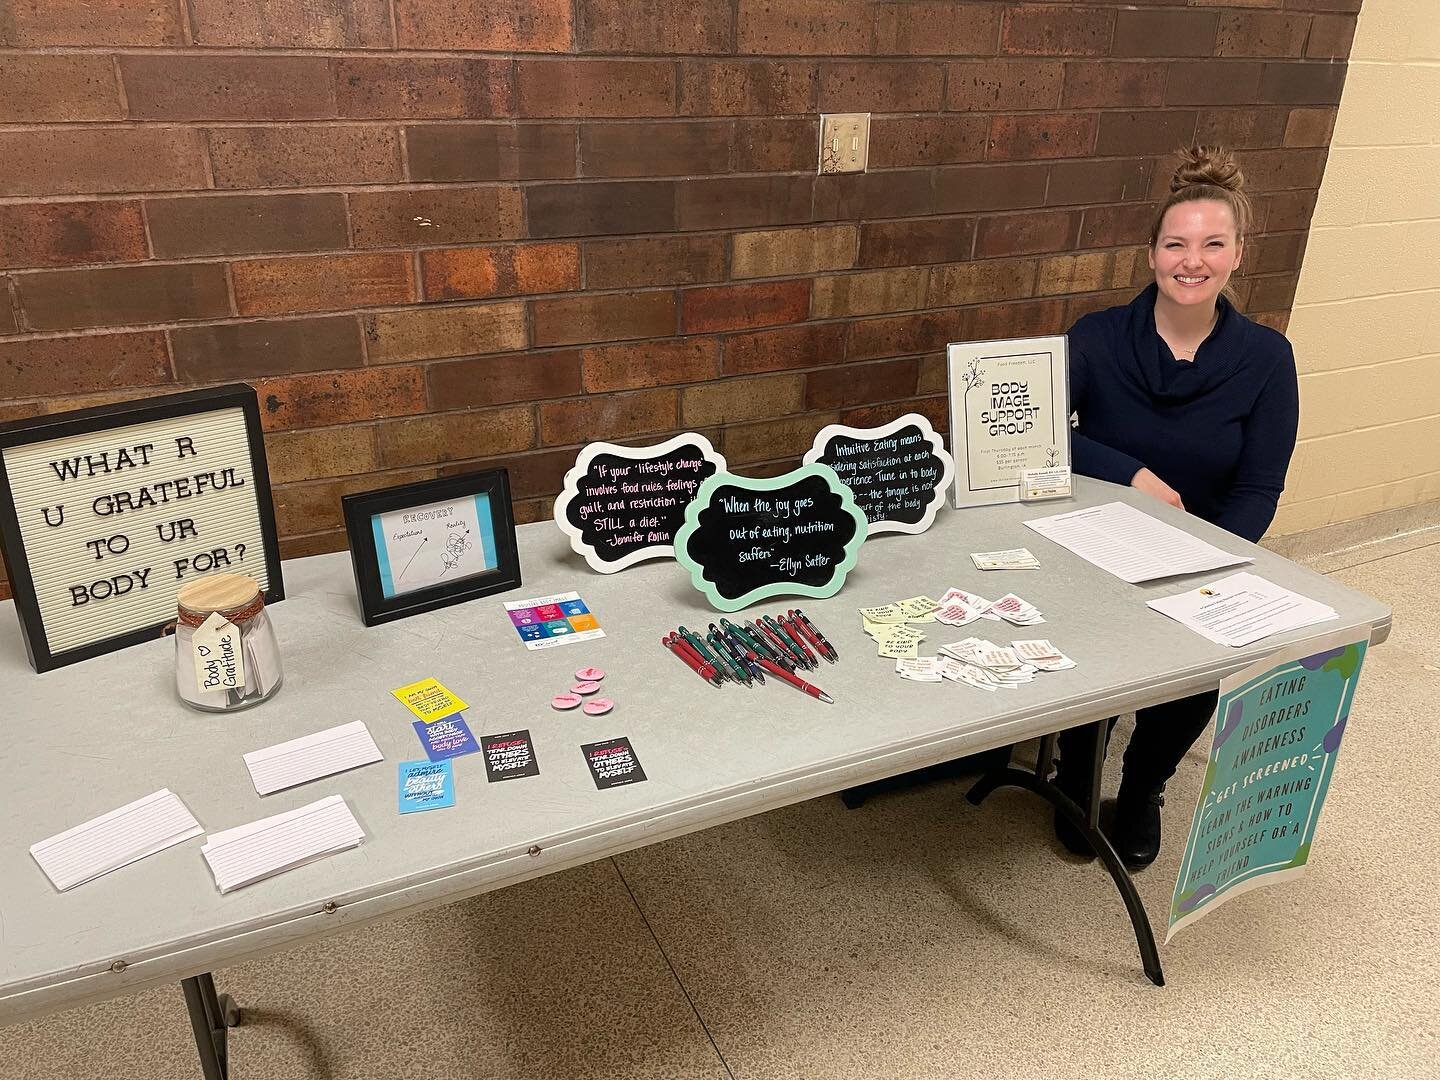 Hanging out at Mt. Pleasant school&rsquo;s Family Night tonight.

It just happens to coincide with #eatingdisorderawarenessweek so I&rsquo;m offering free screens for teens and adults.

#bodyimageawareness #eatingdisorderawareness #dietitian #intuiti